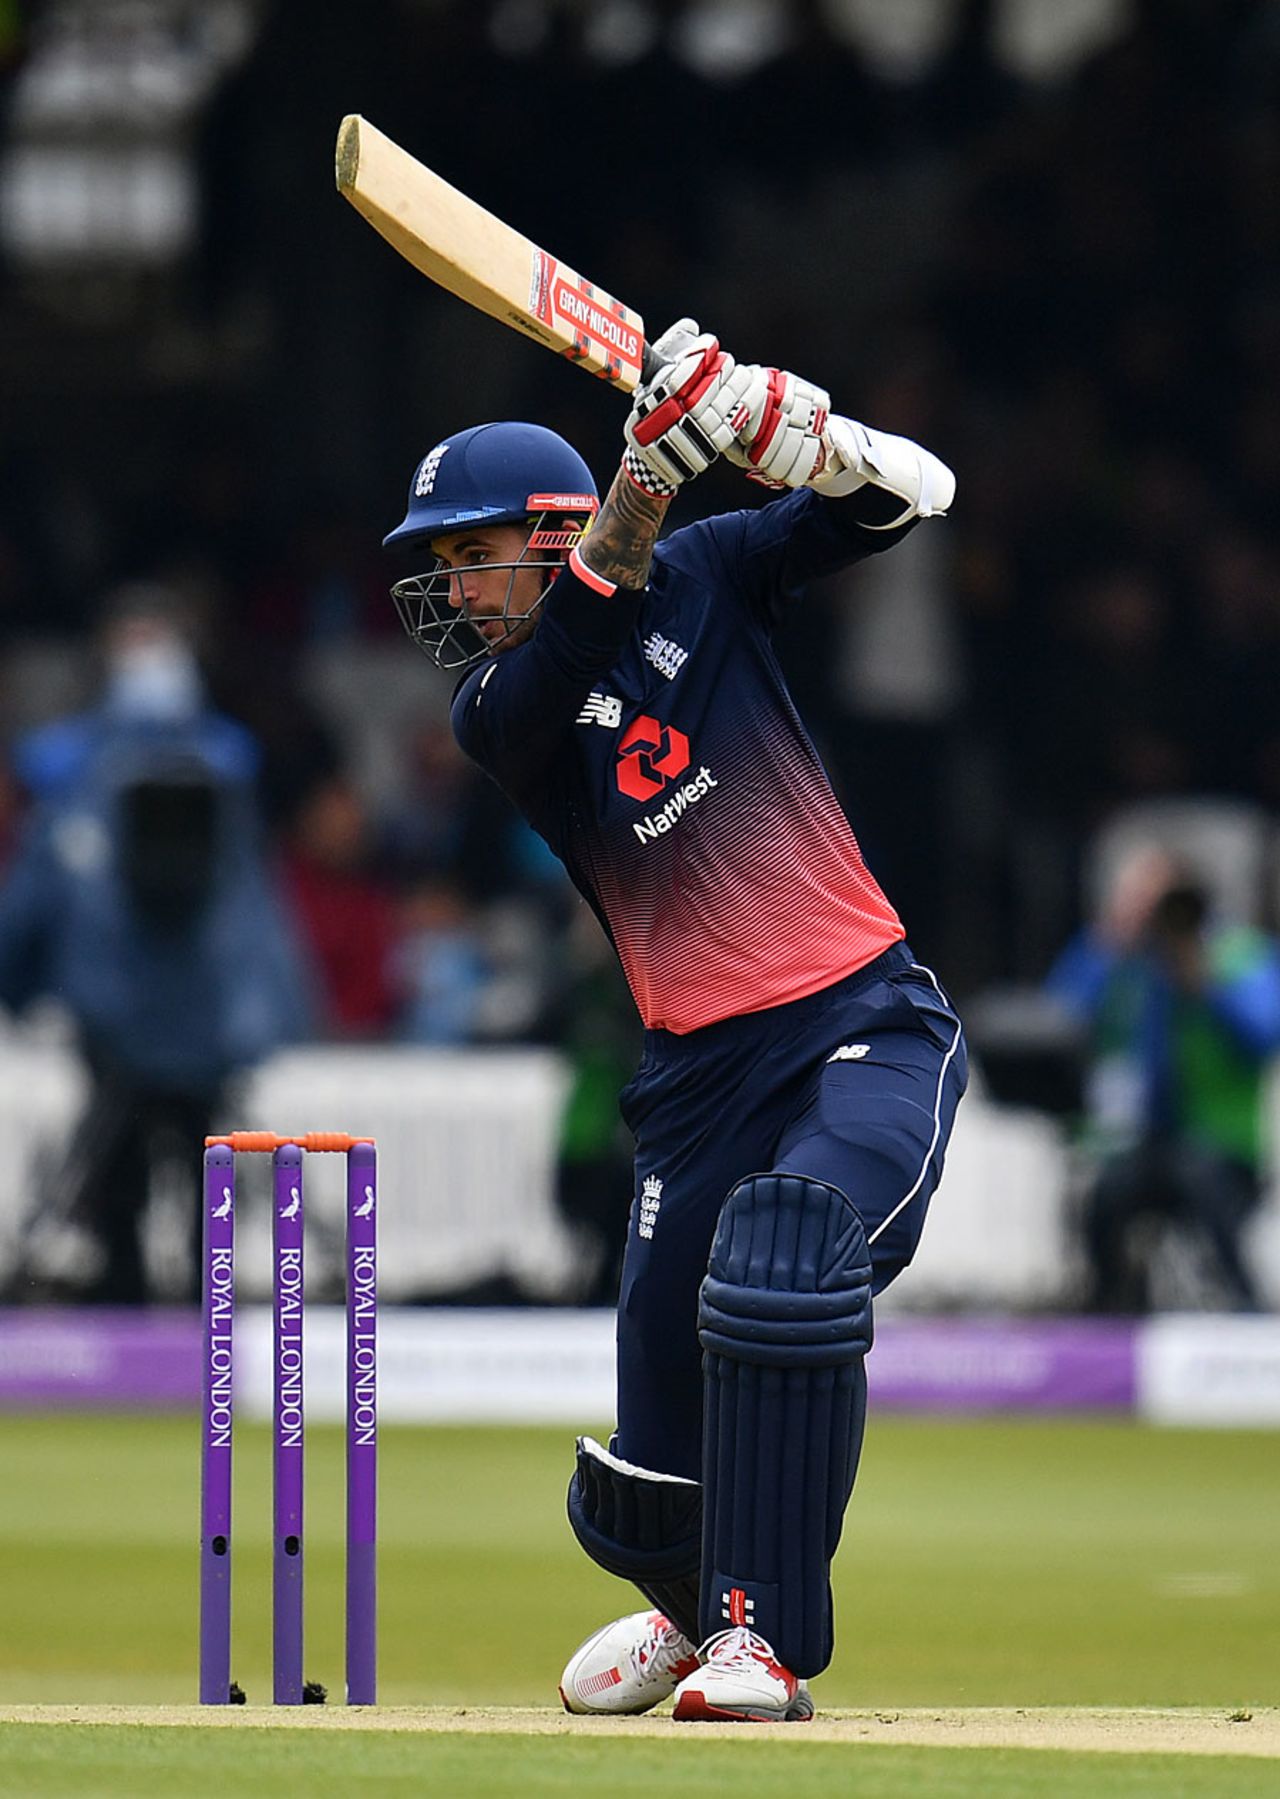 Alex Hales began in confident style, England v Ireland, 2nd ODI, Lord's, May 7, 2017